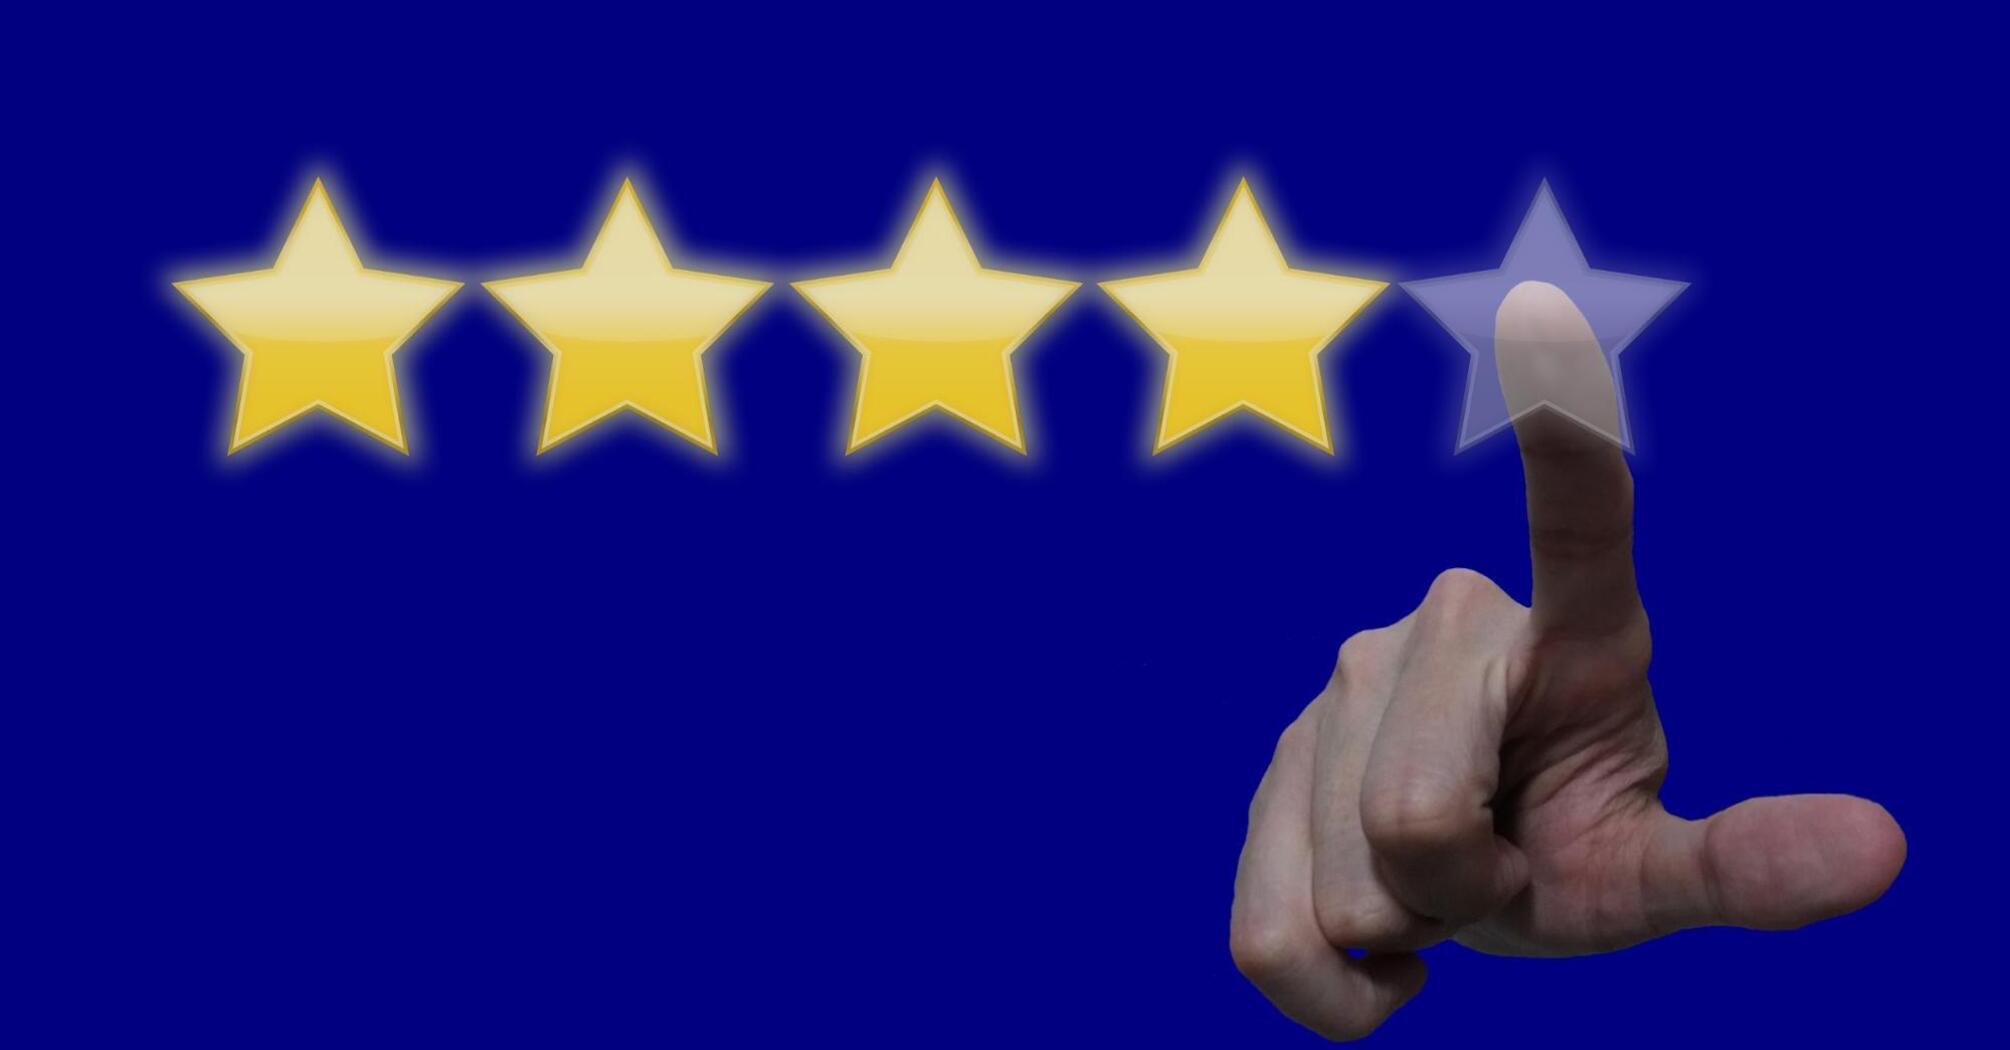 A hand reaching towards a row of five stars, with the fifth star being transparent, against a deep blue background